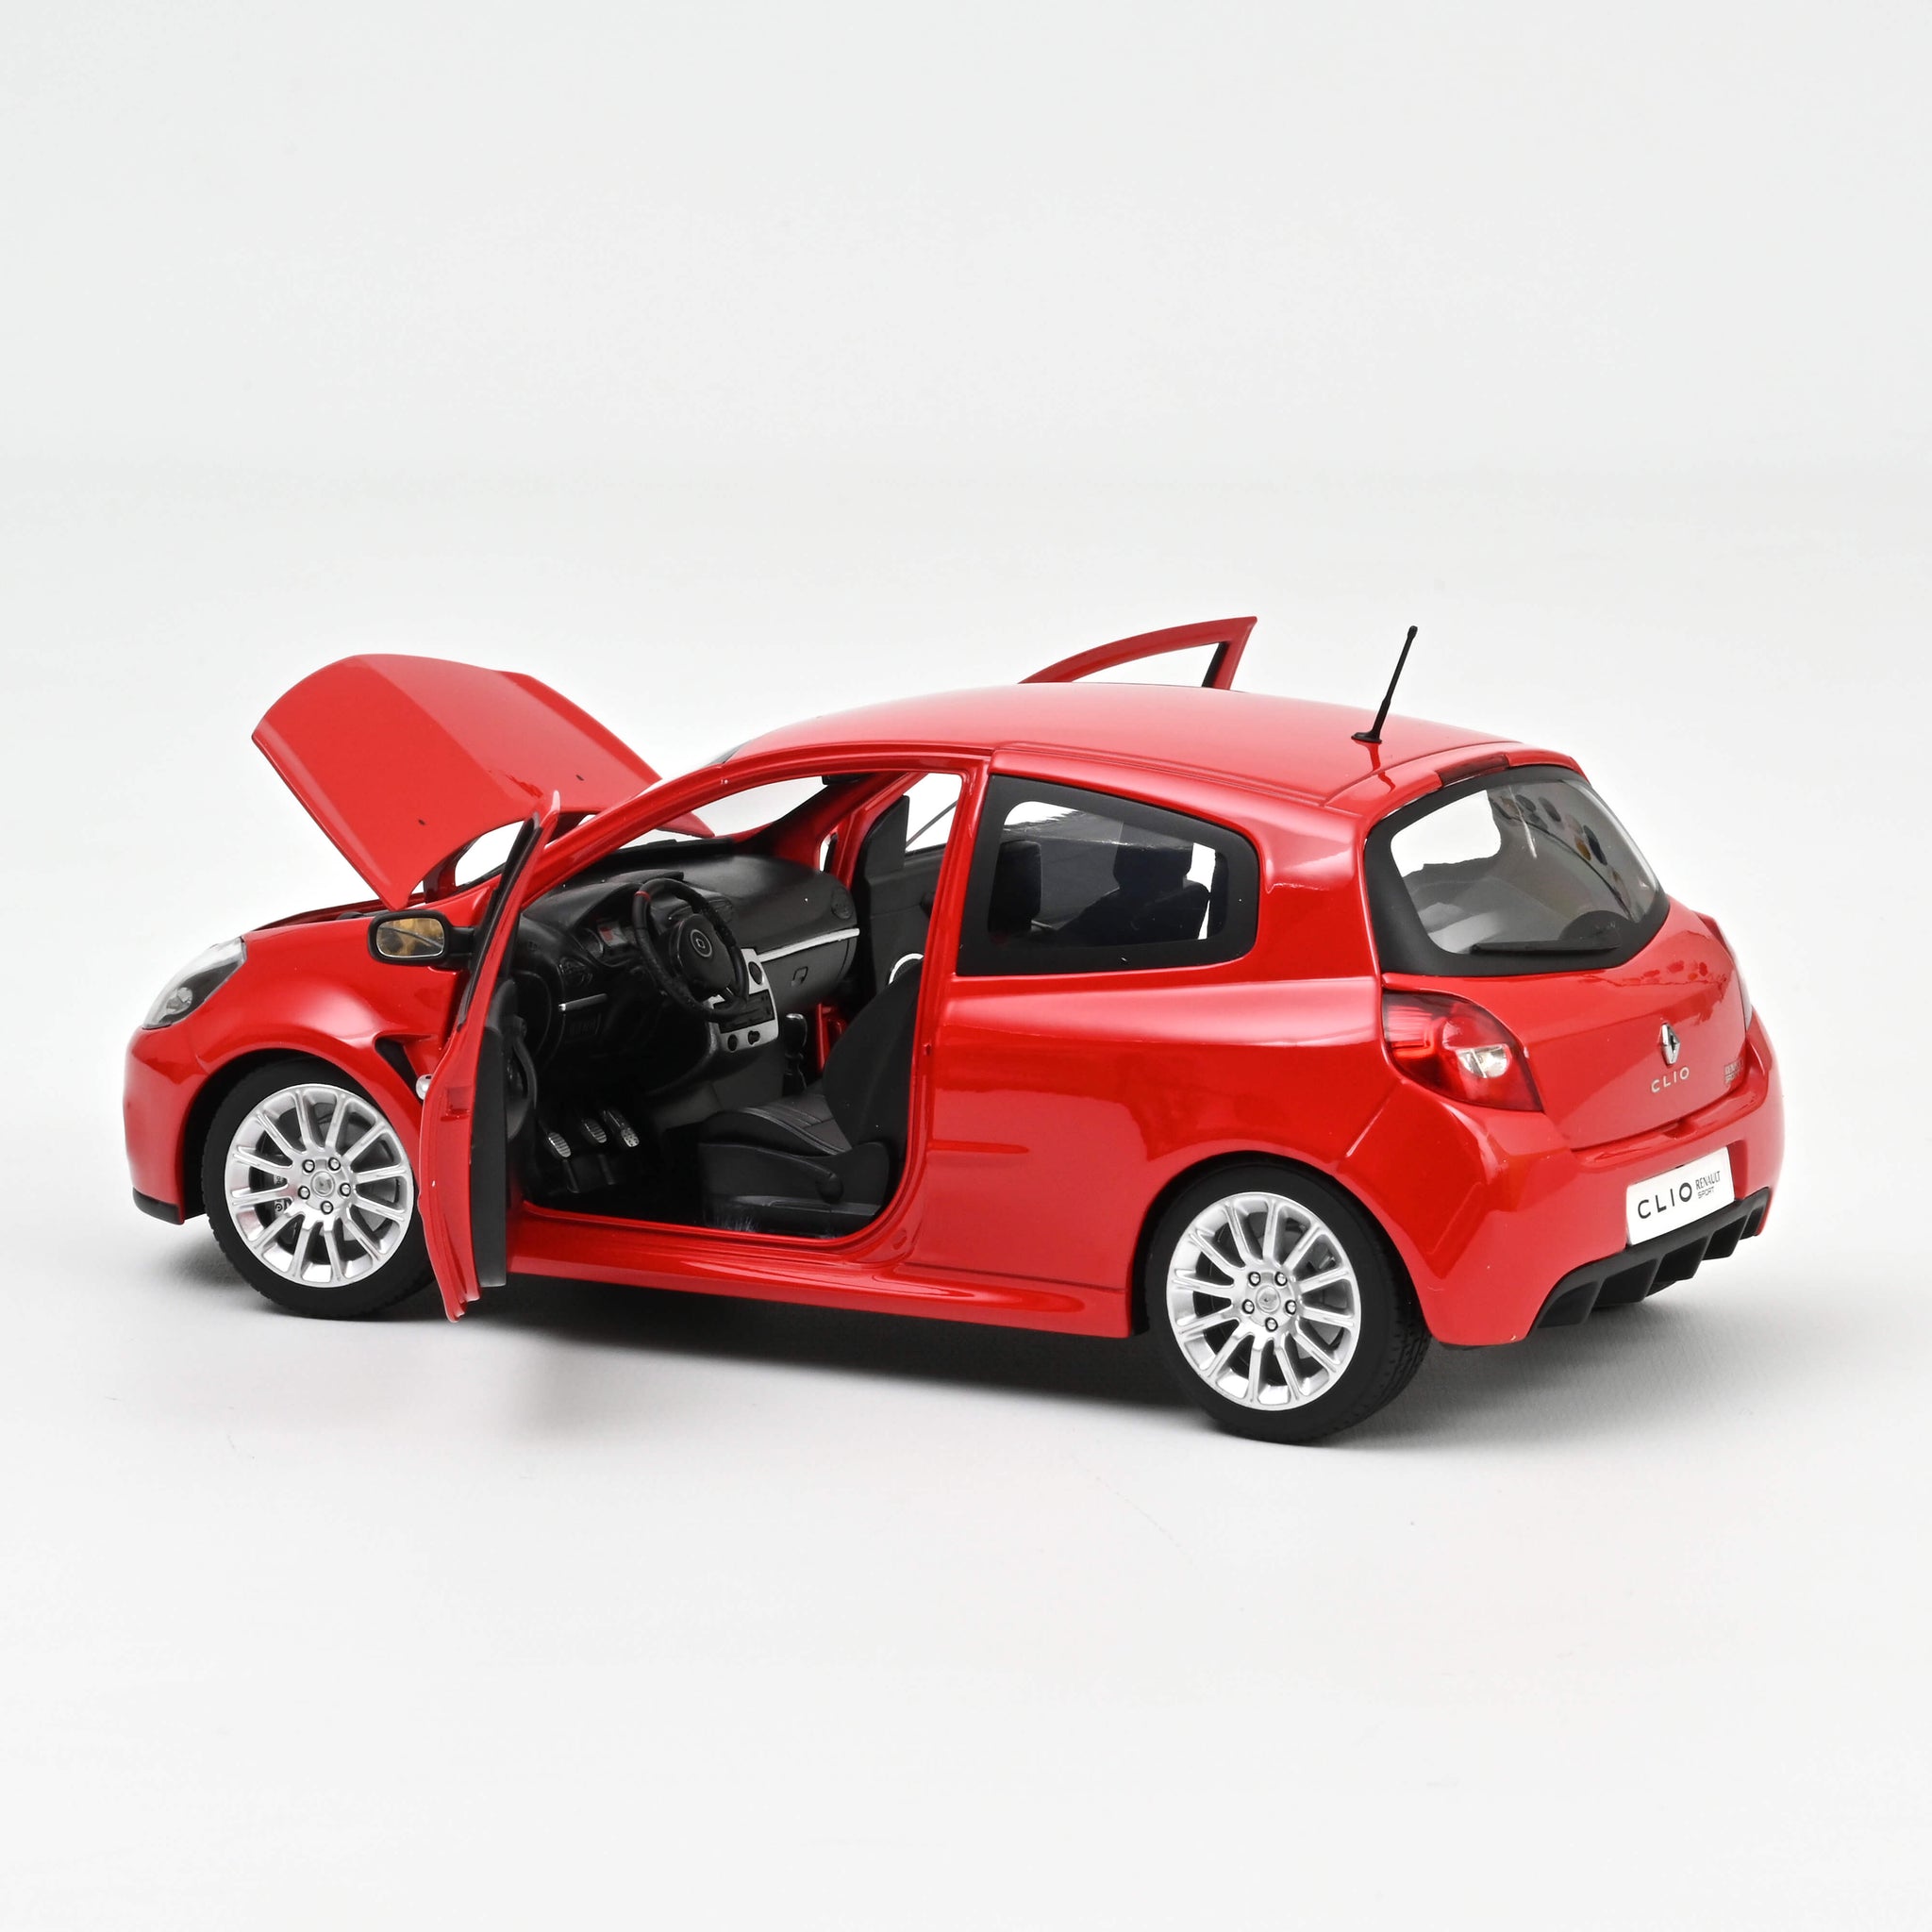 Norev 185252 1:18 For Renault Clio RS 2006 Toro Red Diecast Model Car Toys  Gifts Hobby Display Ornaments Collection